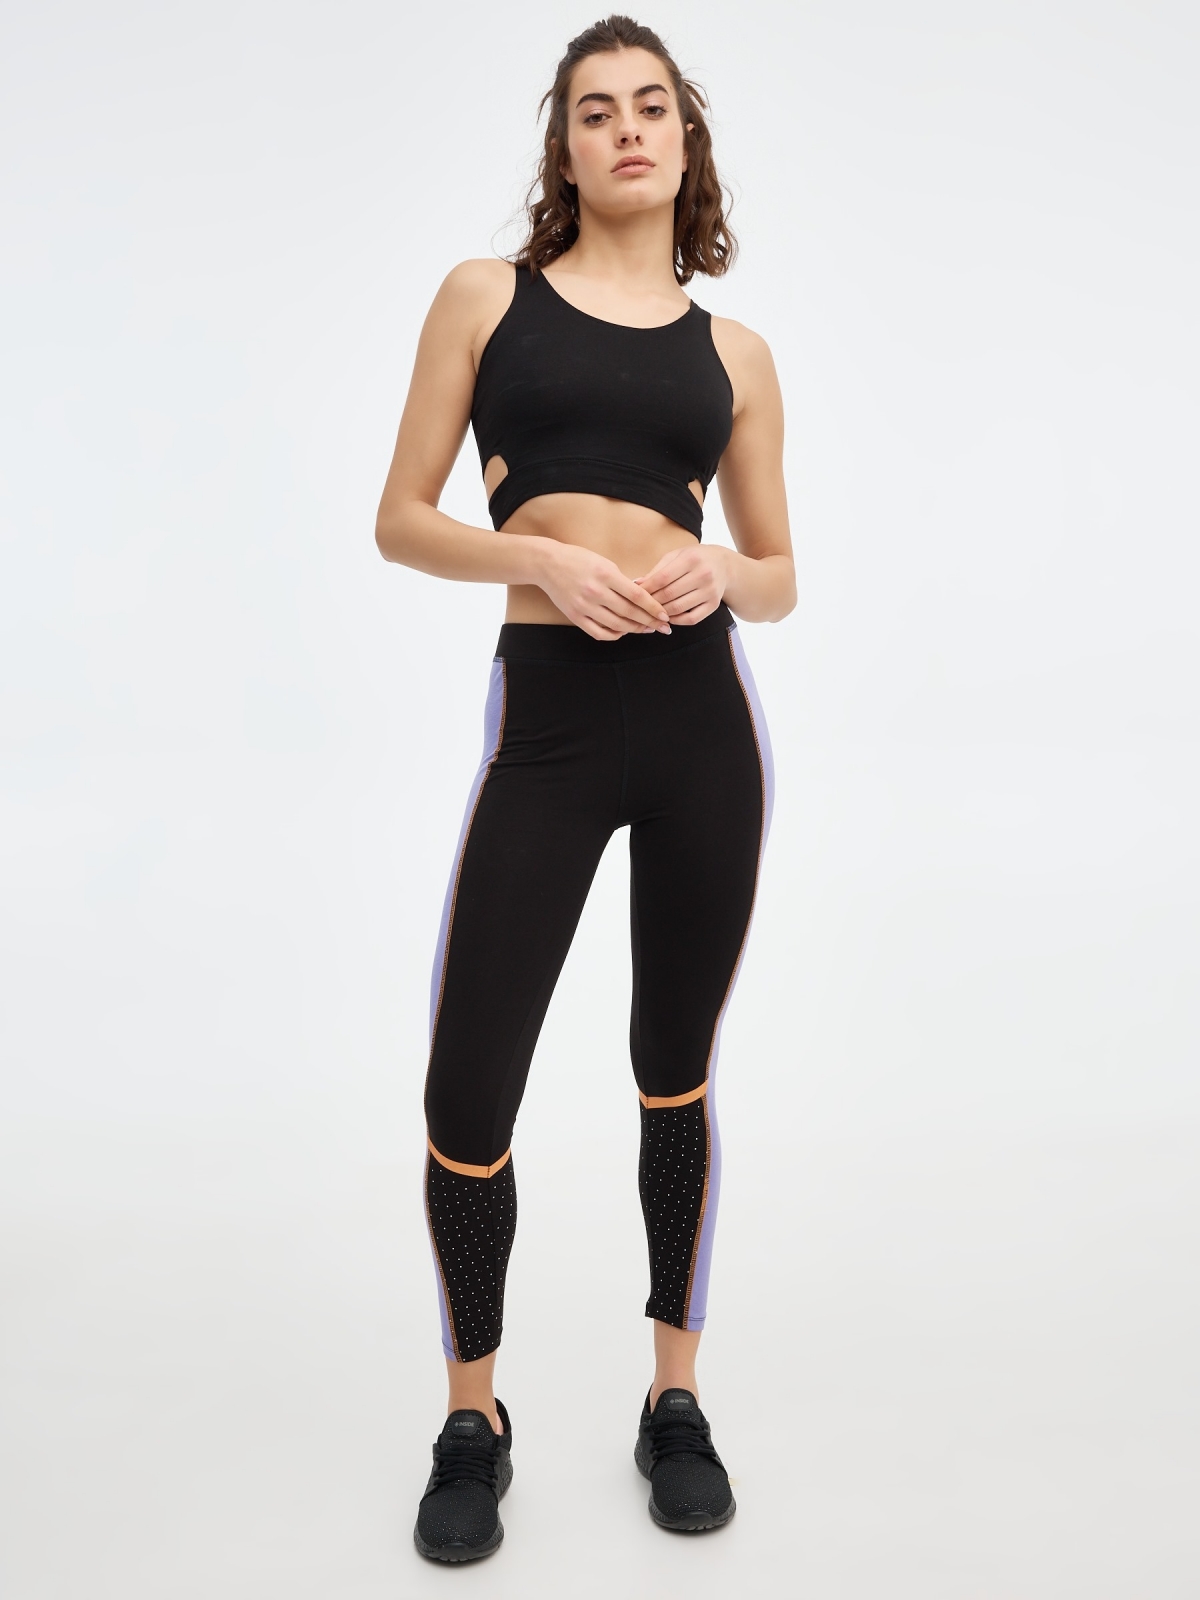 Black leggings with contrasts black middle front view